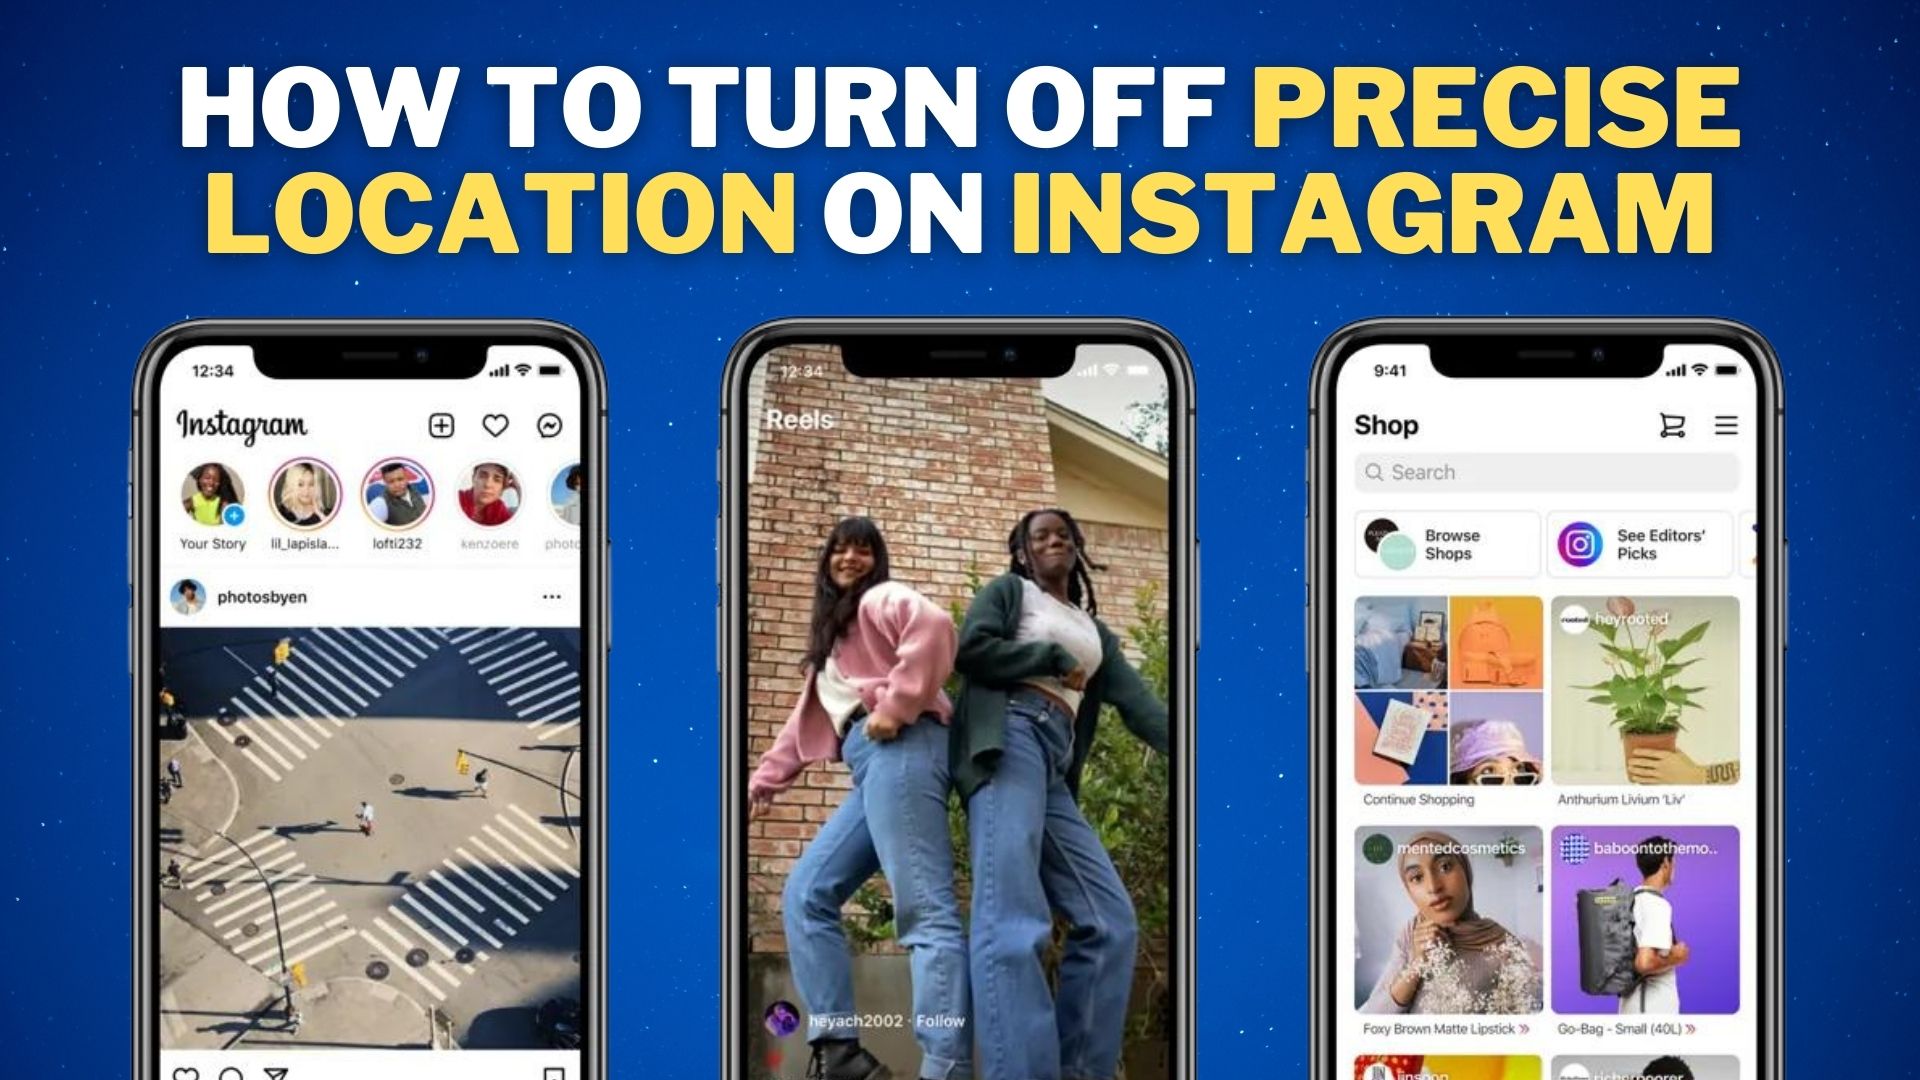 How to Turn off Precise Location on Instagram